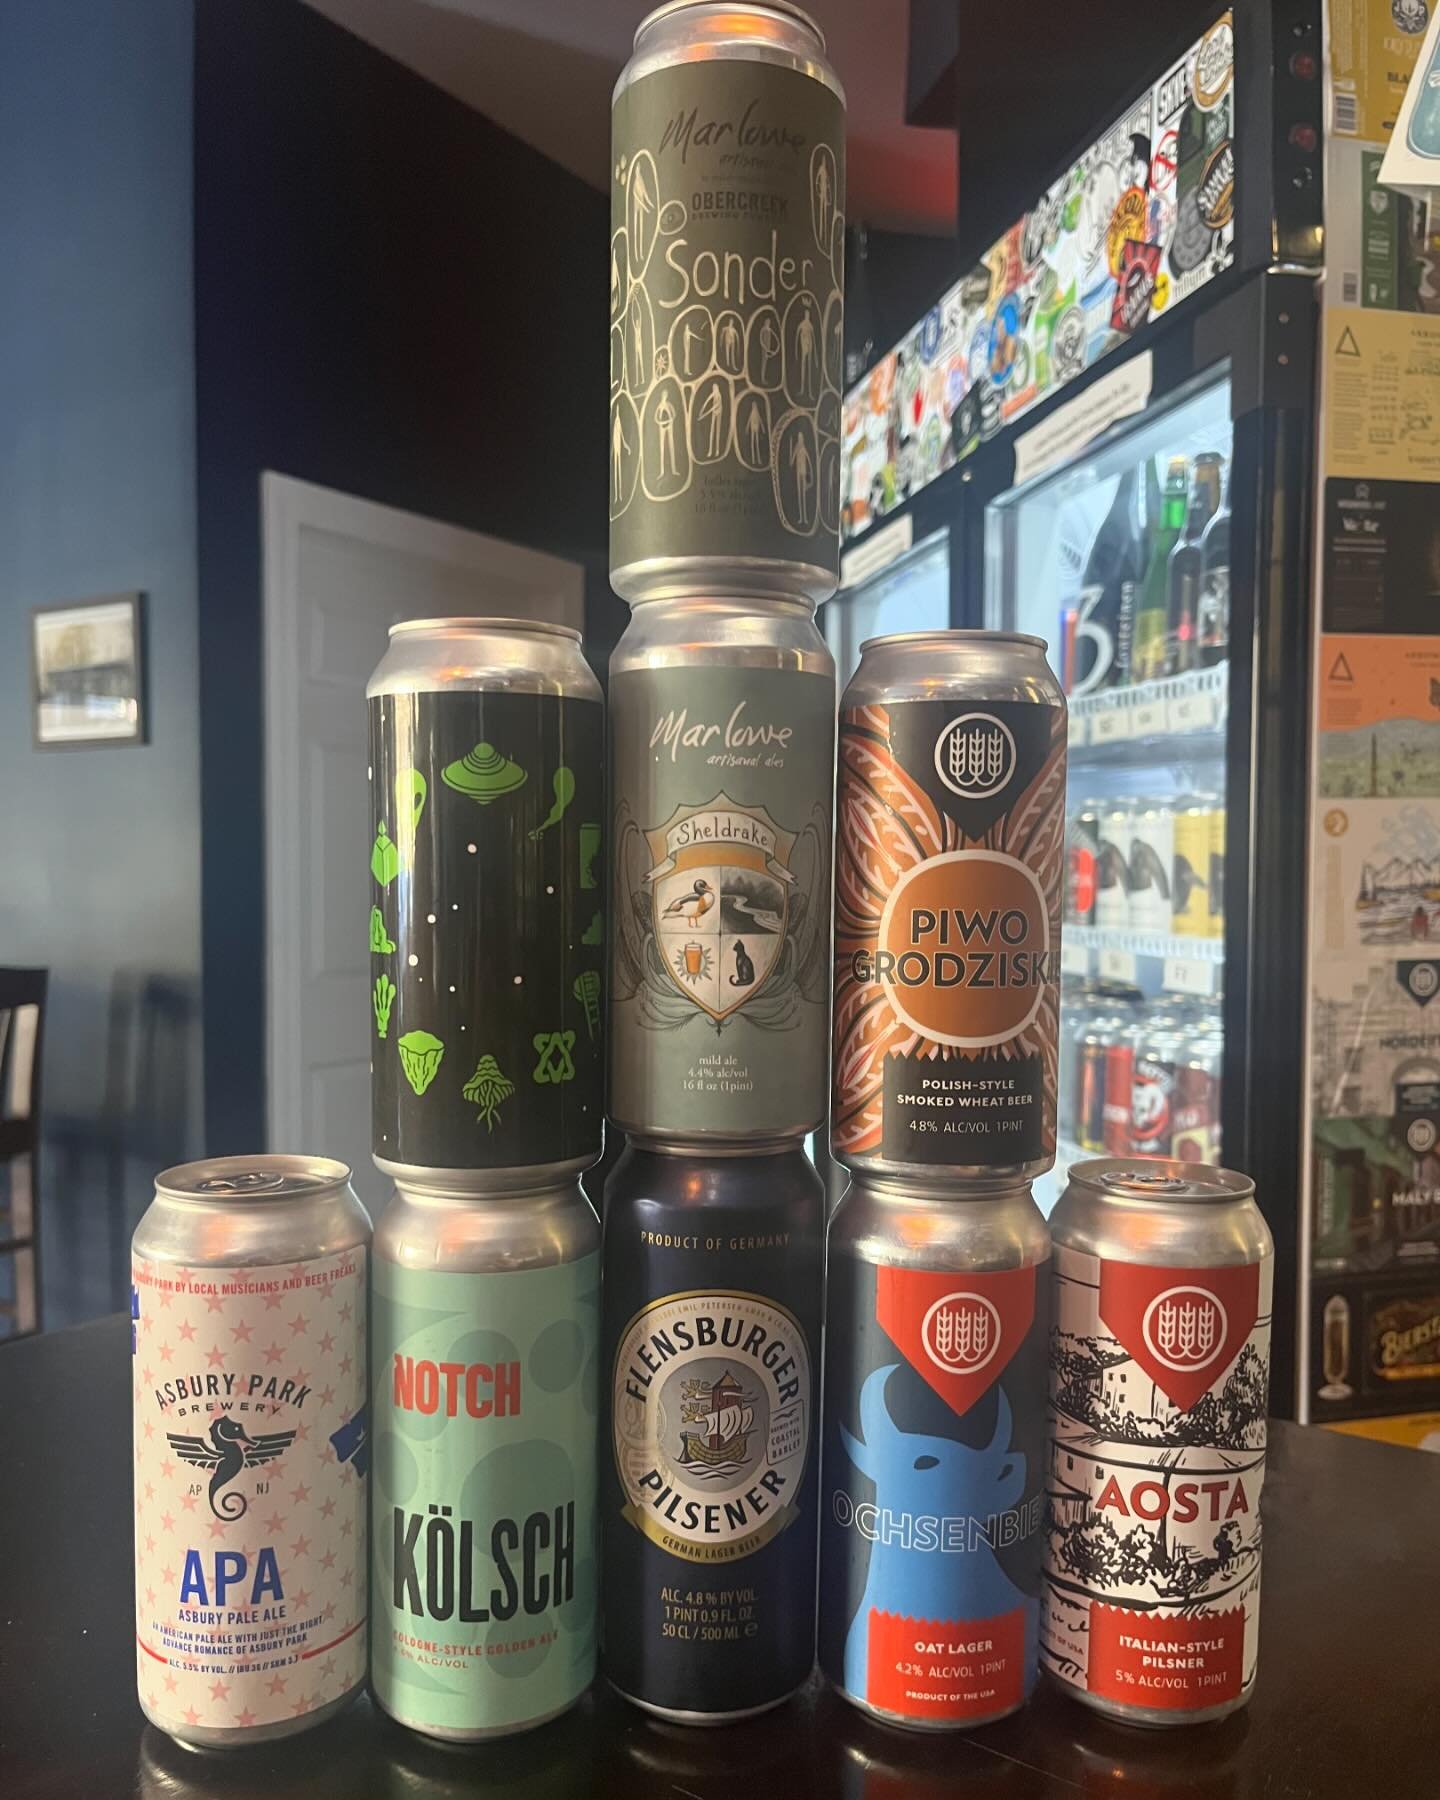 Full can drop for this week. And remember, no corkage fee on Wednesdays so there's never been a better day to come in and try them out. Cheers
.
- @asburyparkbrewery - Asbury Pale Ale
- @notchbrewing - Kolsch
- @omnipollo - Zodiak IPA
- @flens - Germ